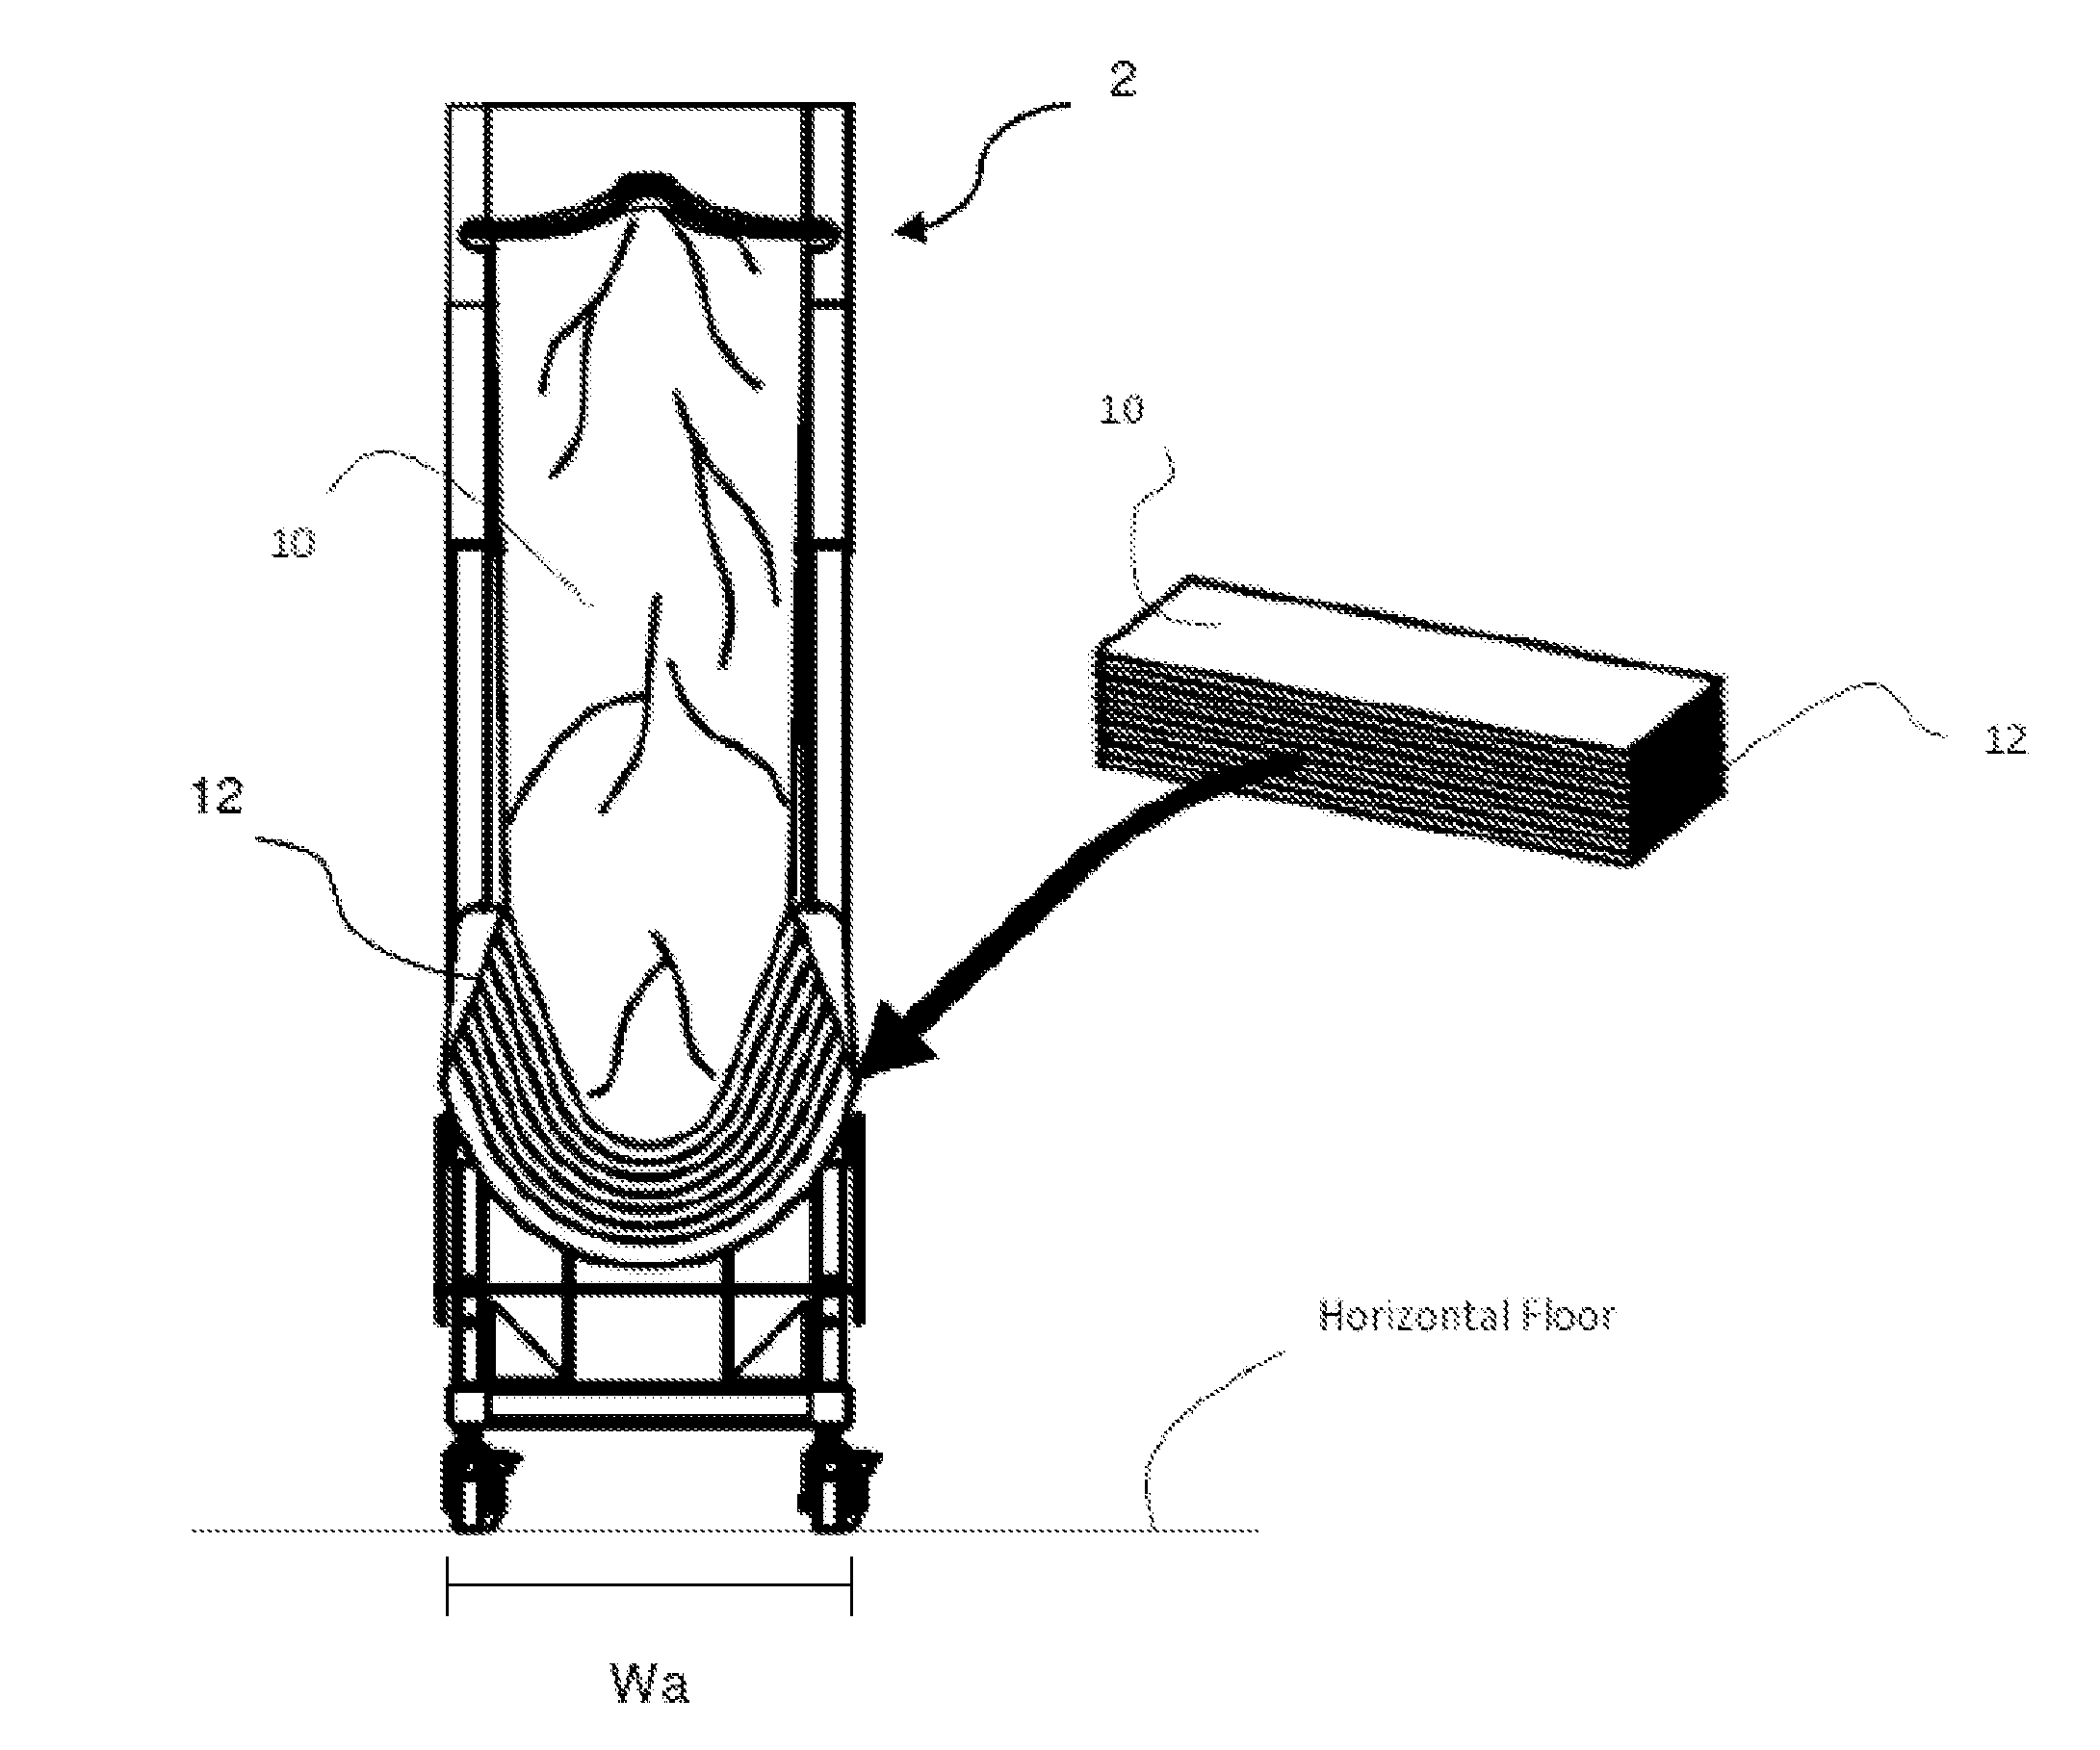 Apparatus, systems and methods for configuring/ feeding sheet stock material for a dunnage system and for generating upright edge dunnage strips